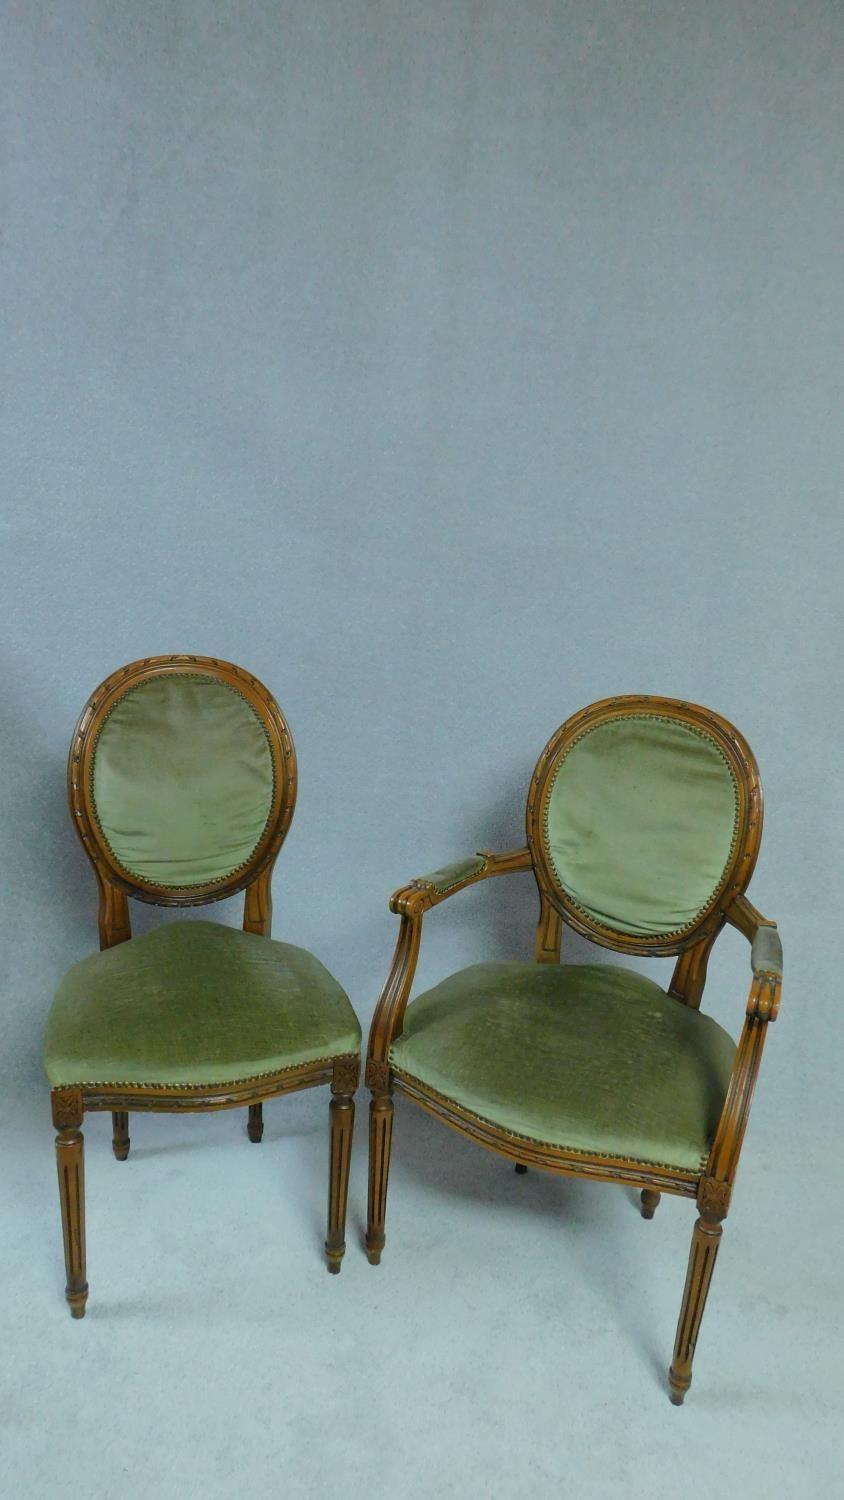 A set of ten Louis XVI style beech framed dining chairs in sage green velour upholstery, including - Image 2 of 4